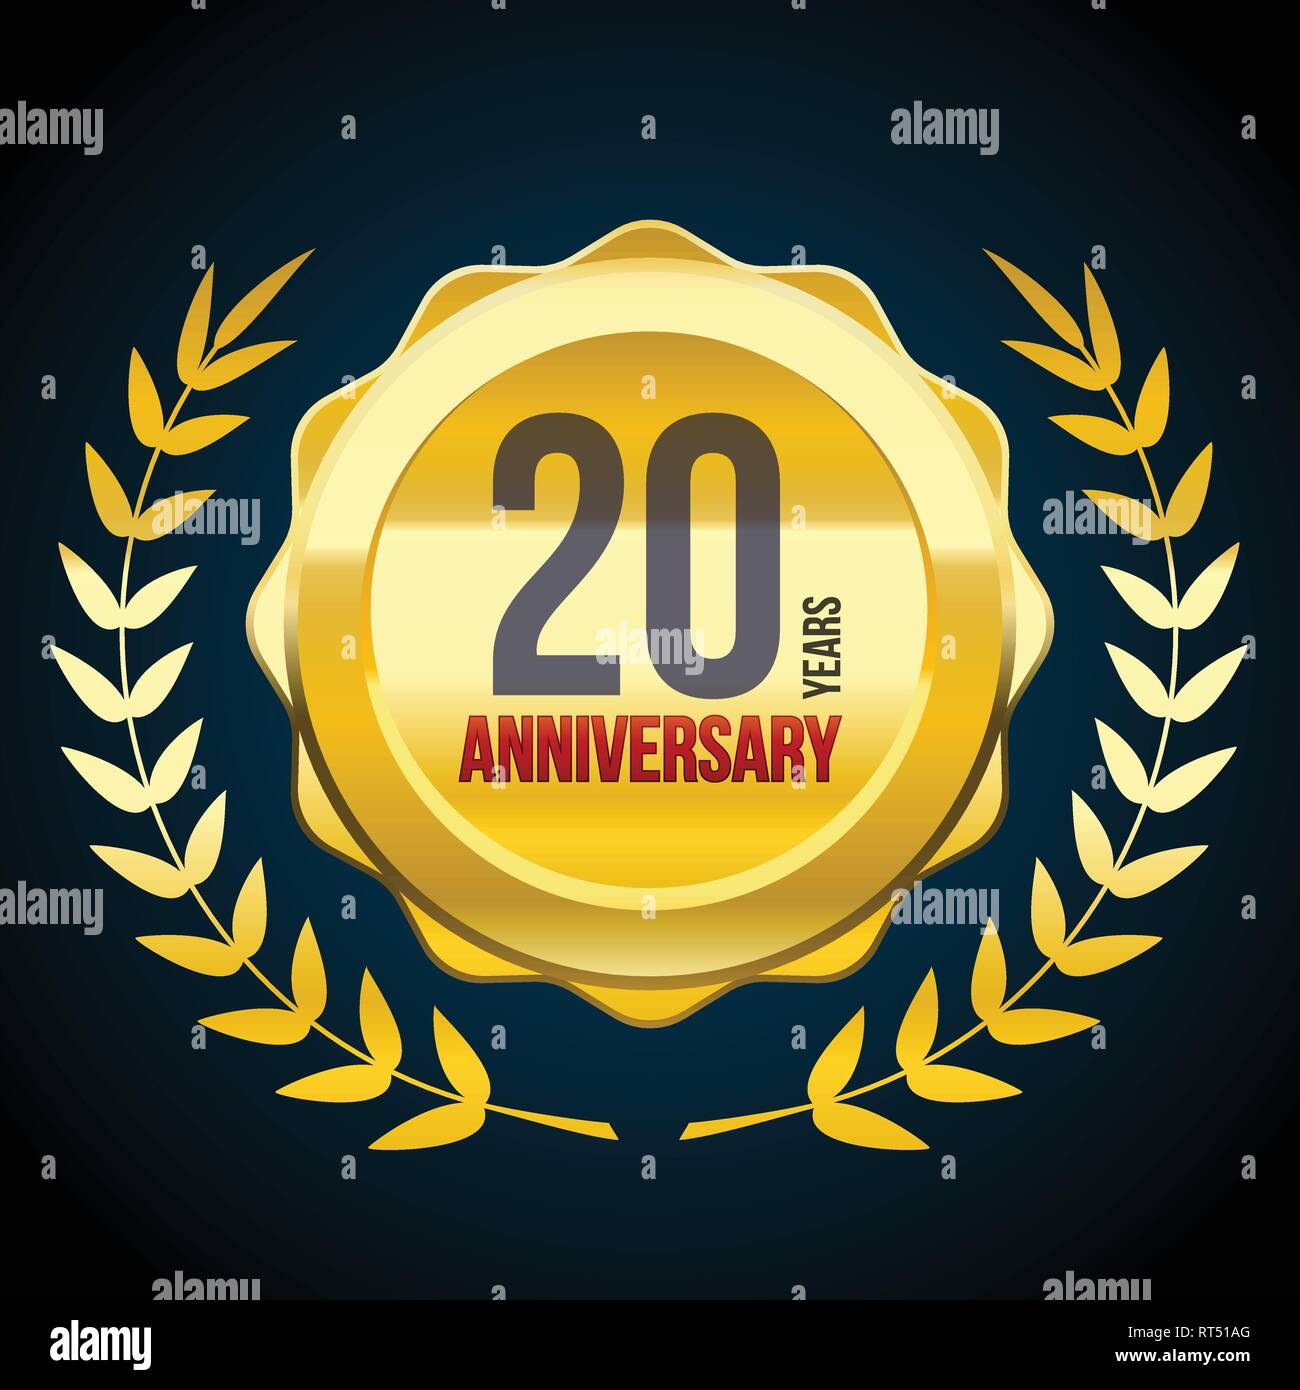 20 Years anniversary Gold and Red badge logo. Vector illustration eps10 Stock Vector